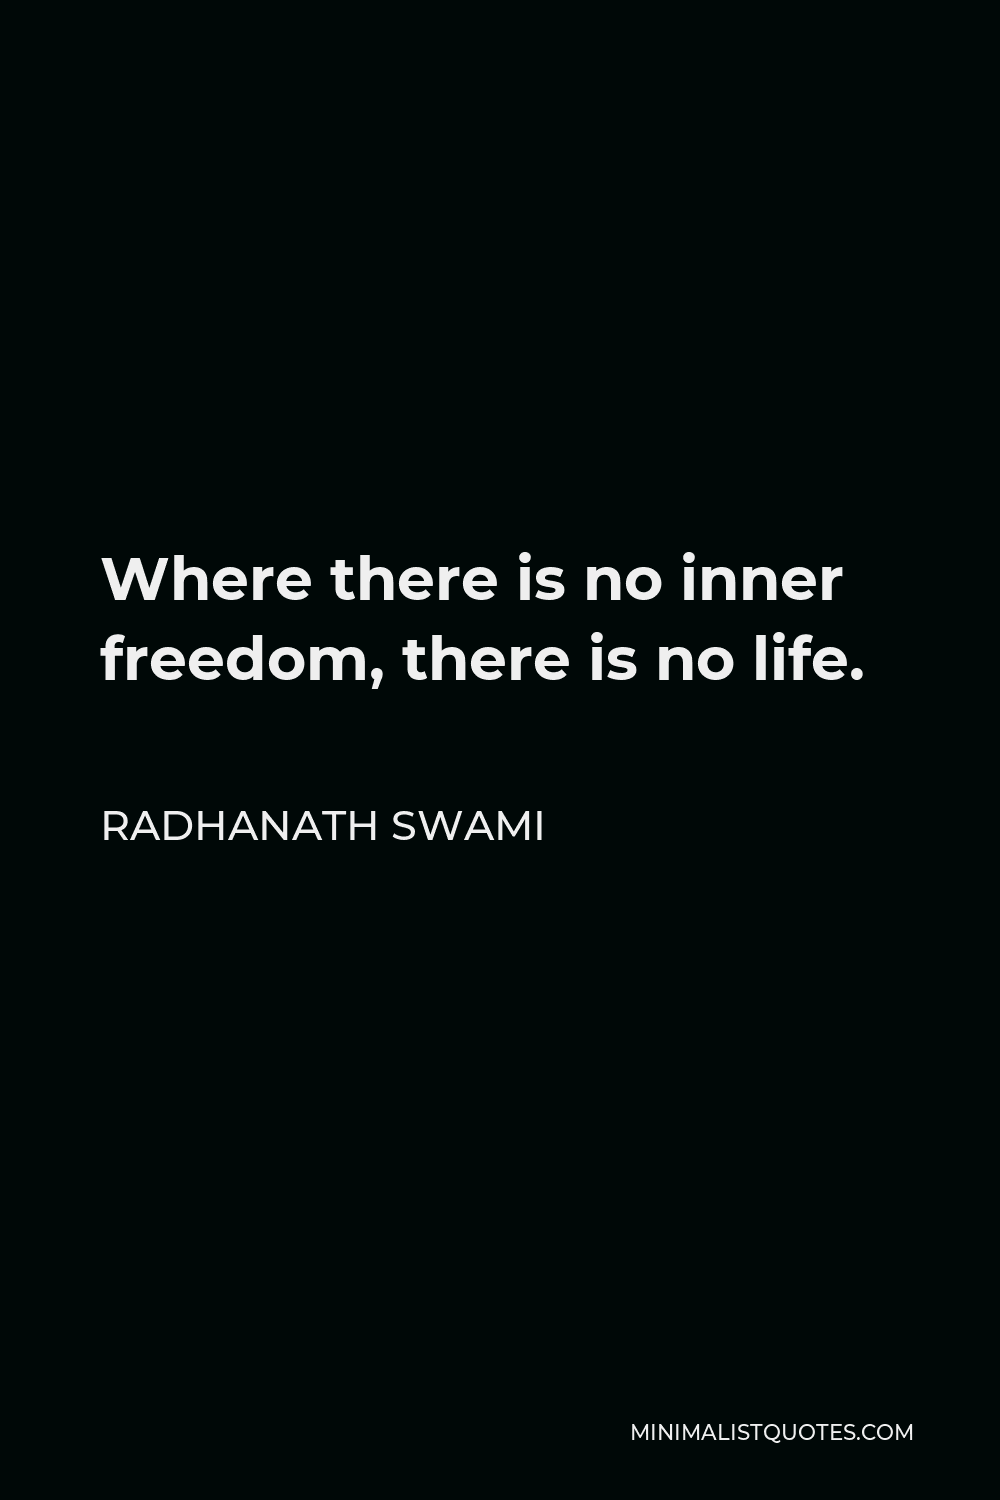 Radhanath Swami Quote - Where there is no inner freedom, there is no life.